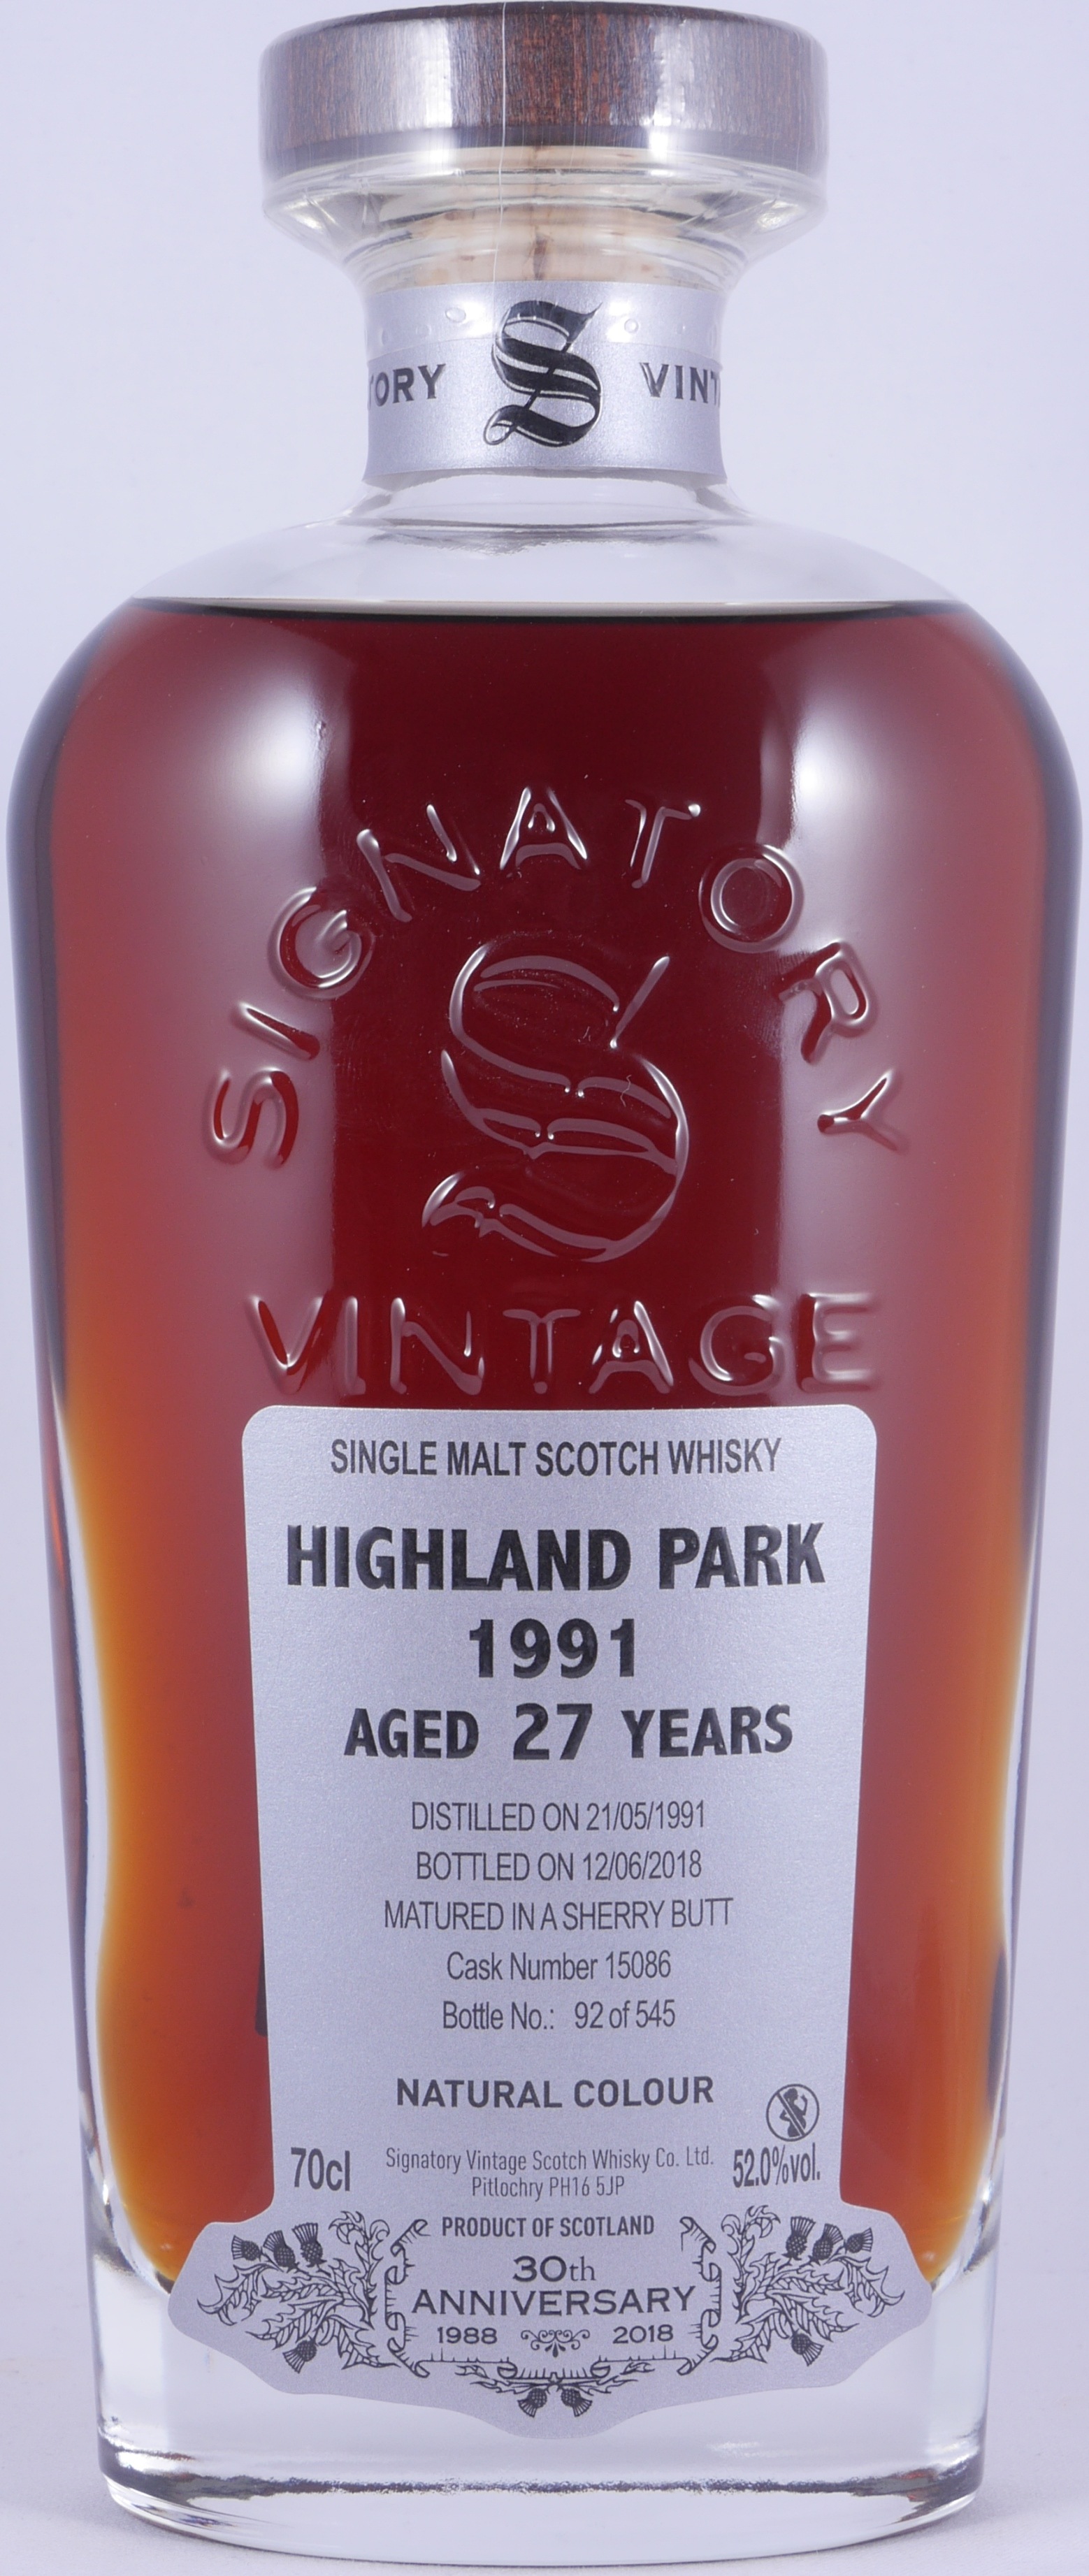 Buy Highland Park 1991 27 Years-old Sherry Butt Cask No. 15086 Signatory  30th Anniversary Limited Edition Orkney Islands Single Malt Scotch Whisky  Cask Strength 52.0% ABV secure at AmCom secure online